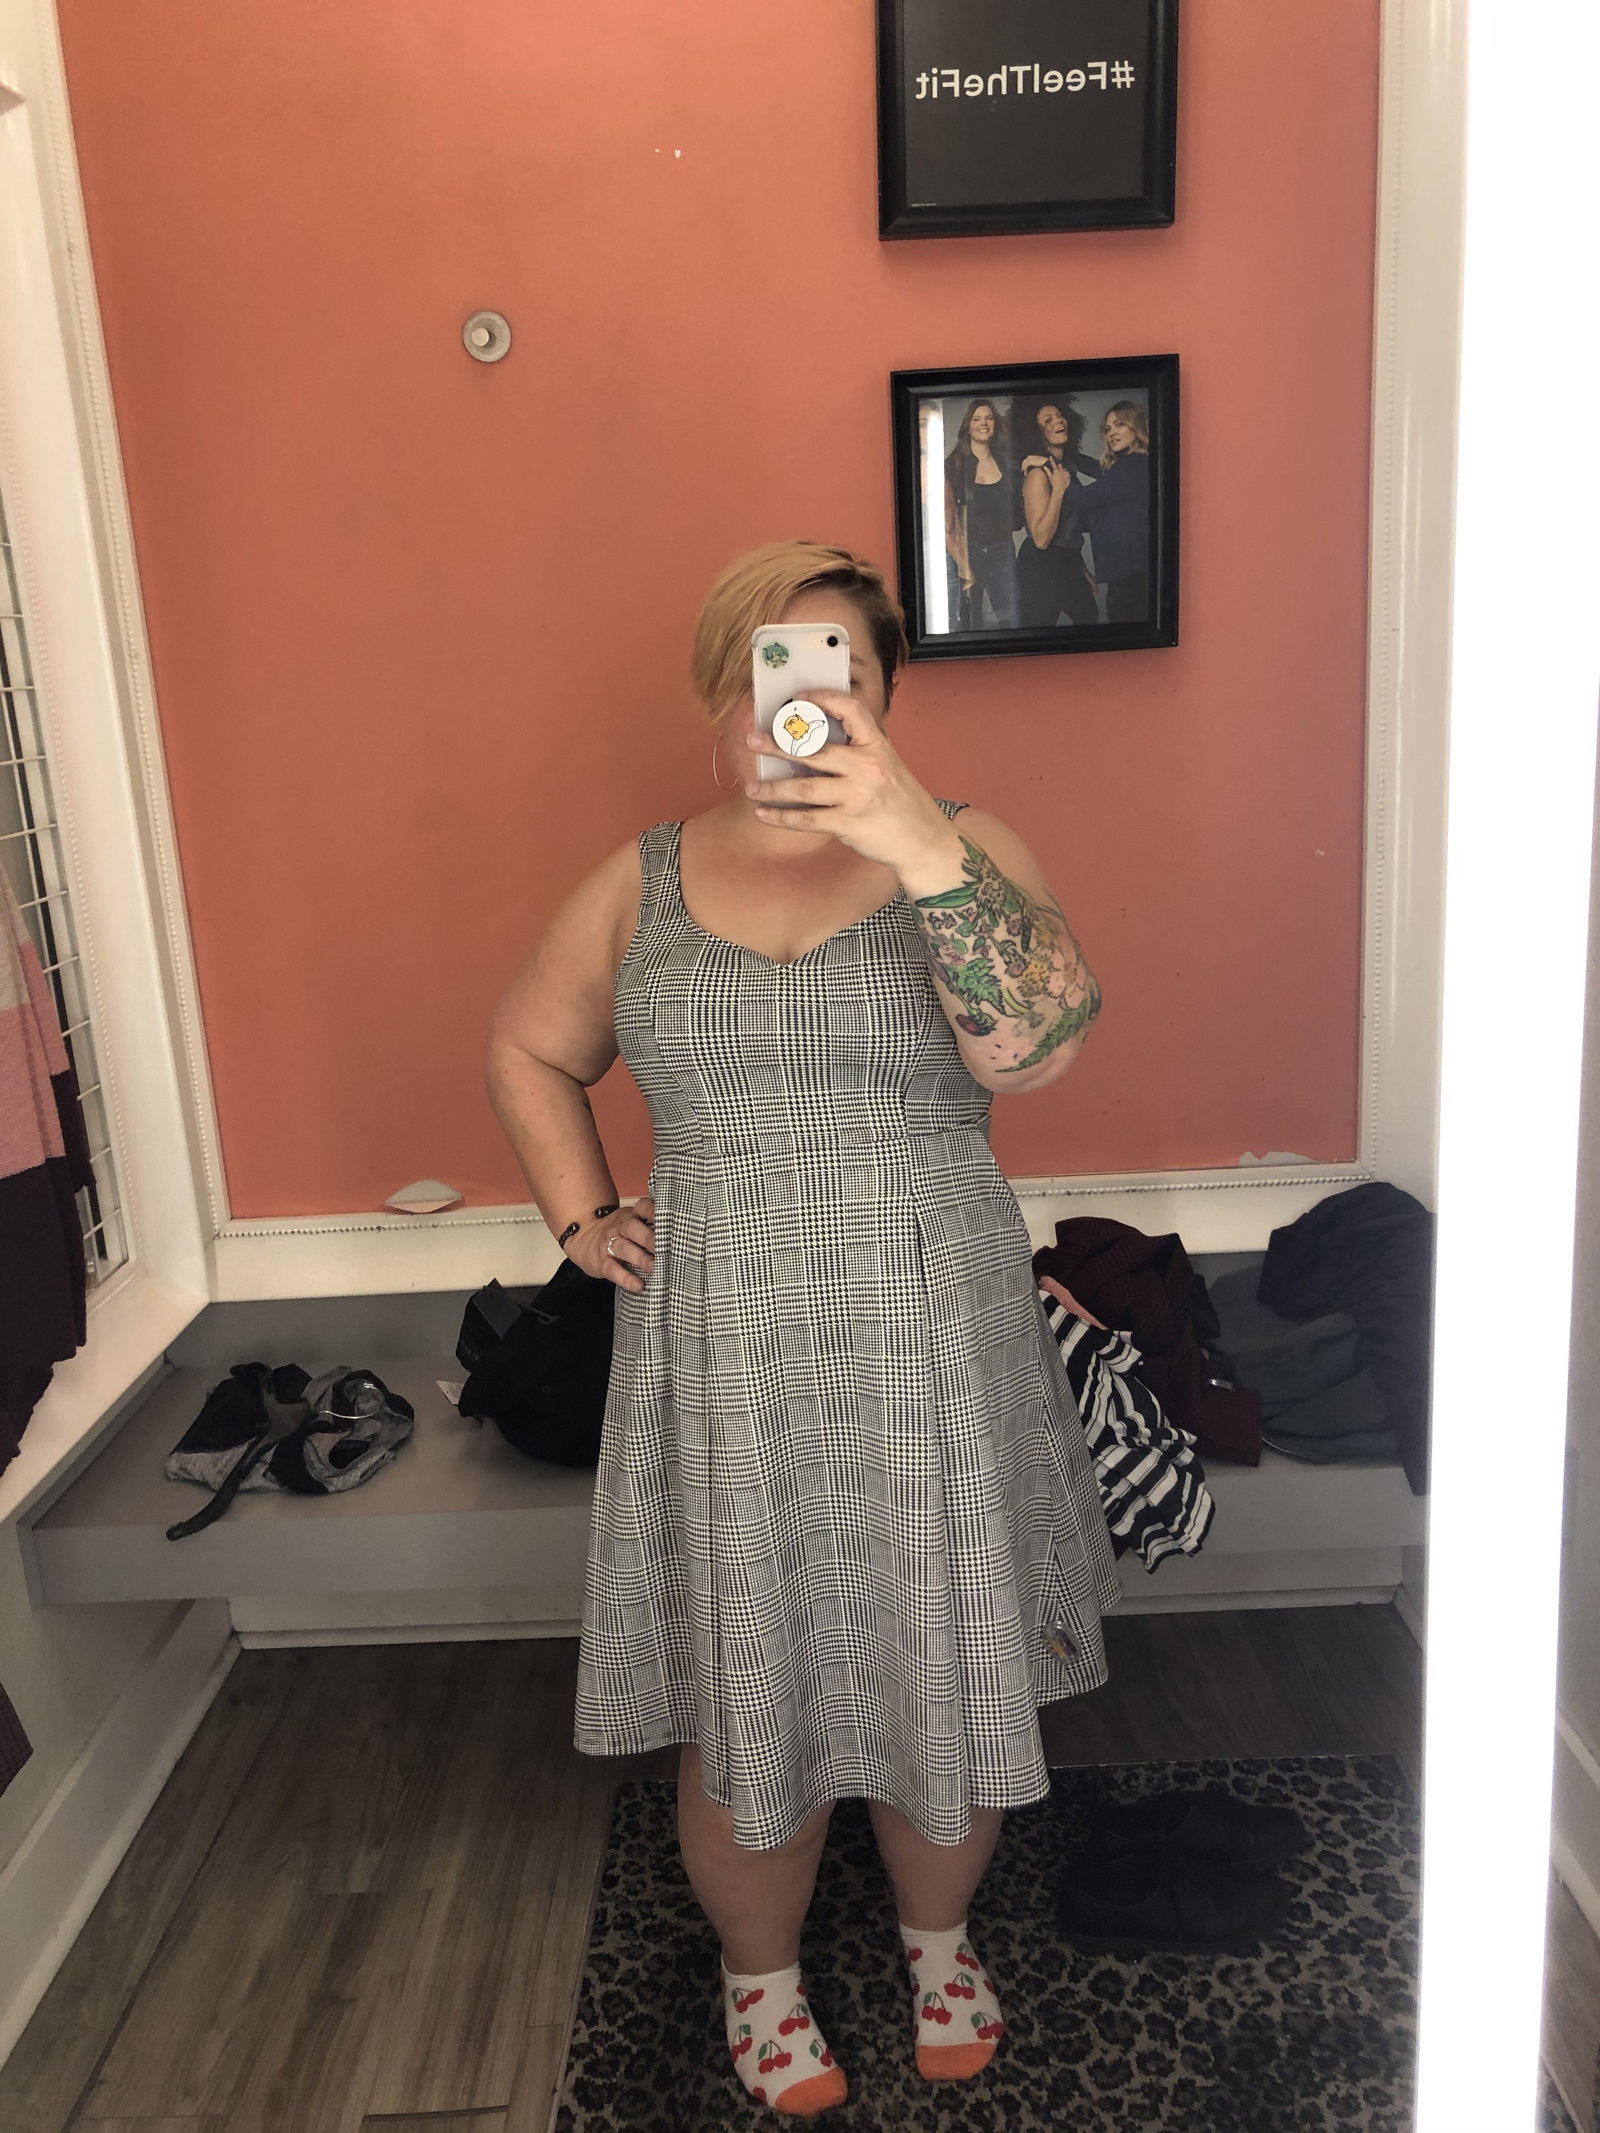 Watch the Photo by alizabethedw with the username @alizabethedw, who is a star user, posted on October 16, 2019 and the text says 'Yesterday I went to Torrid and Lane Bryant 💕

If you want saucy dressing room pics, maybe you should subcribe to My AVNStars in time for the next shopping trip 😏'